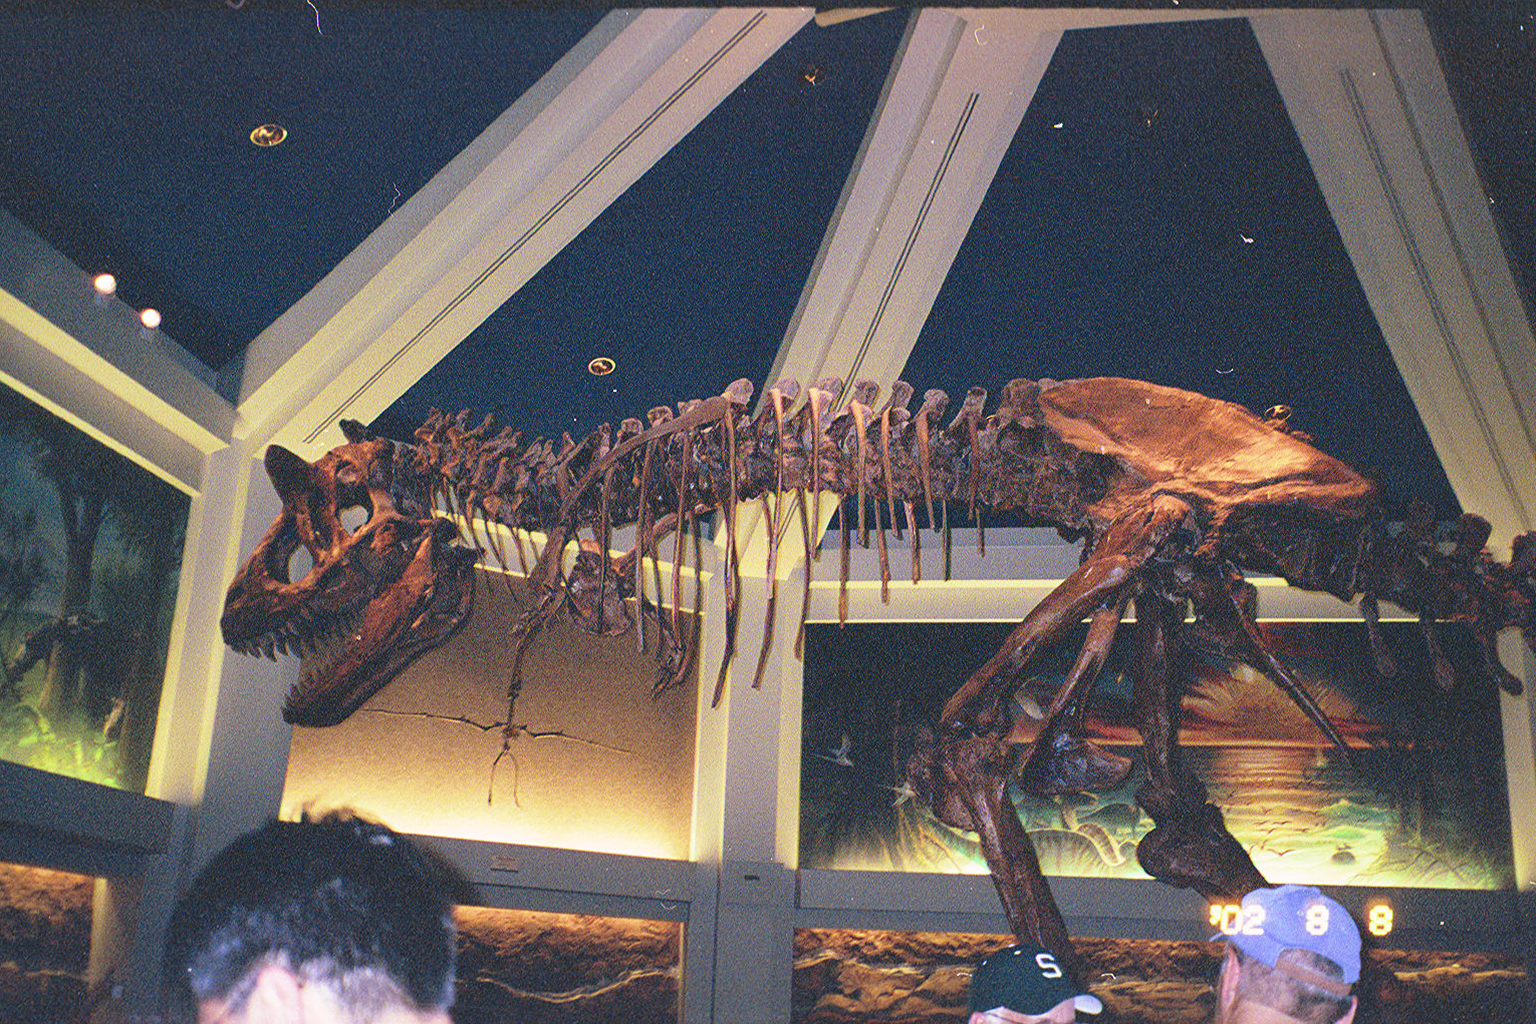 Sue the T-Rex from the field museum. This is the largest T-Rex found in the world